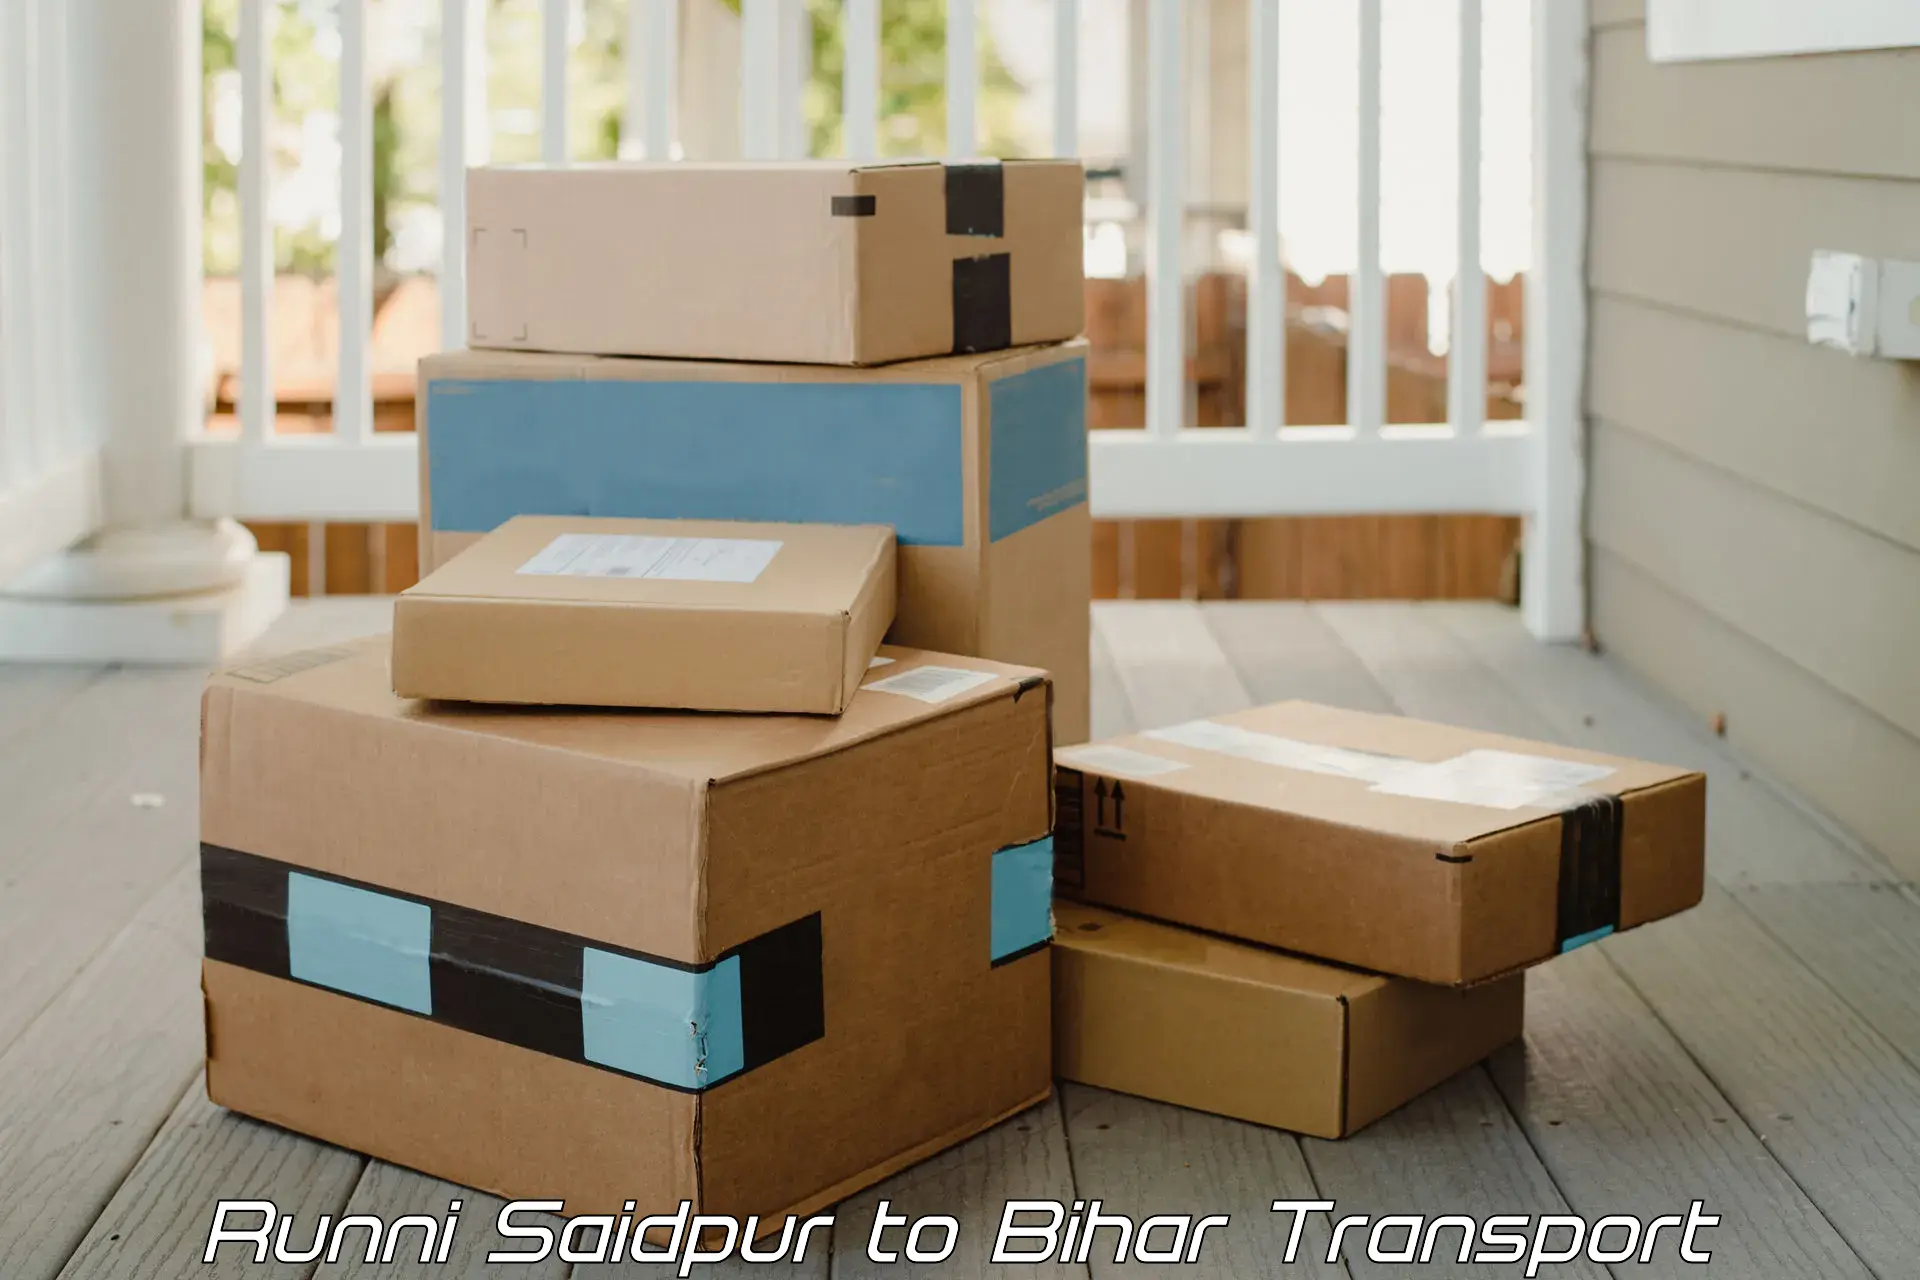 Part load transport service in India Runni Saidpur to Kamtaul